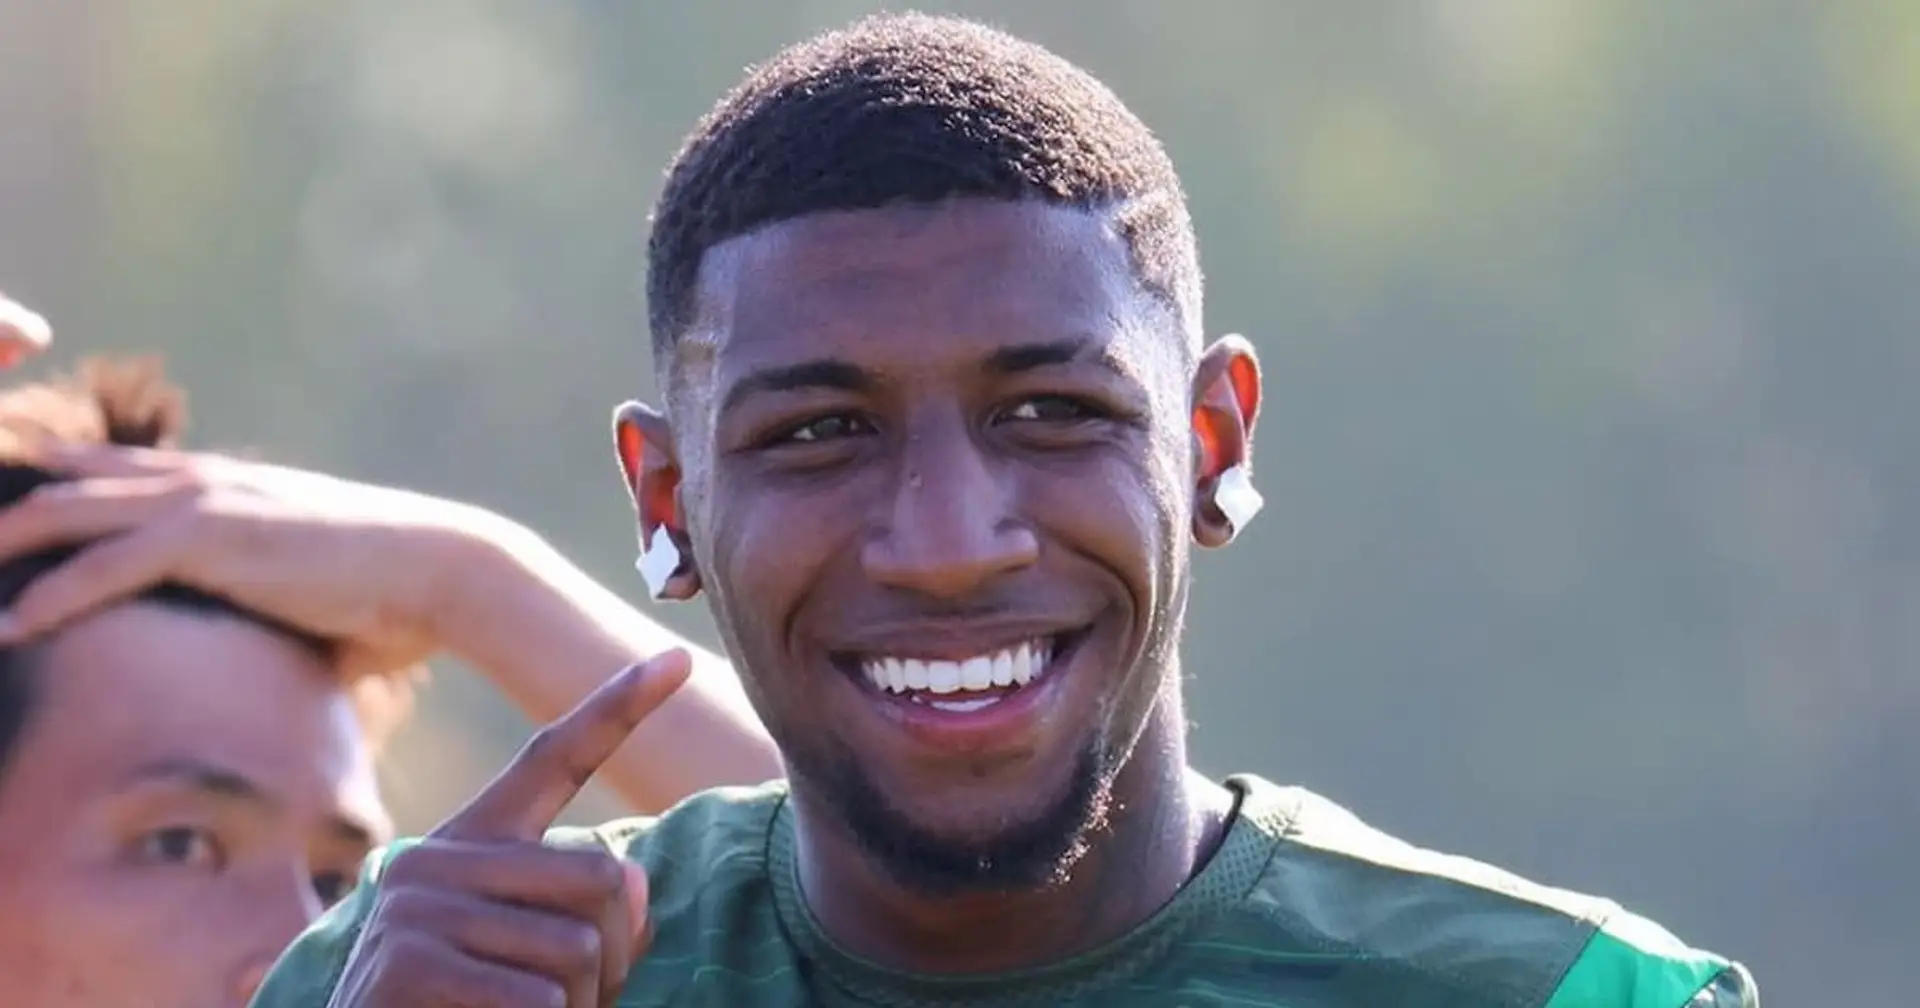 Barcelona might sell Emerson this summer, Betis looking for replacements